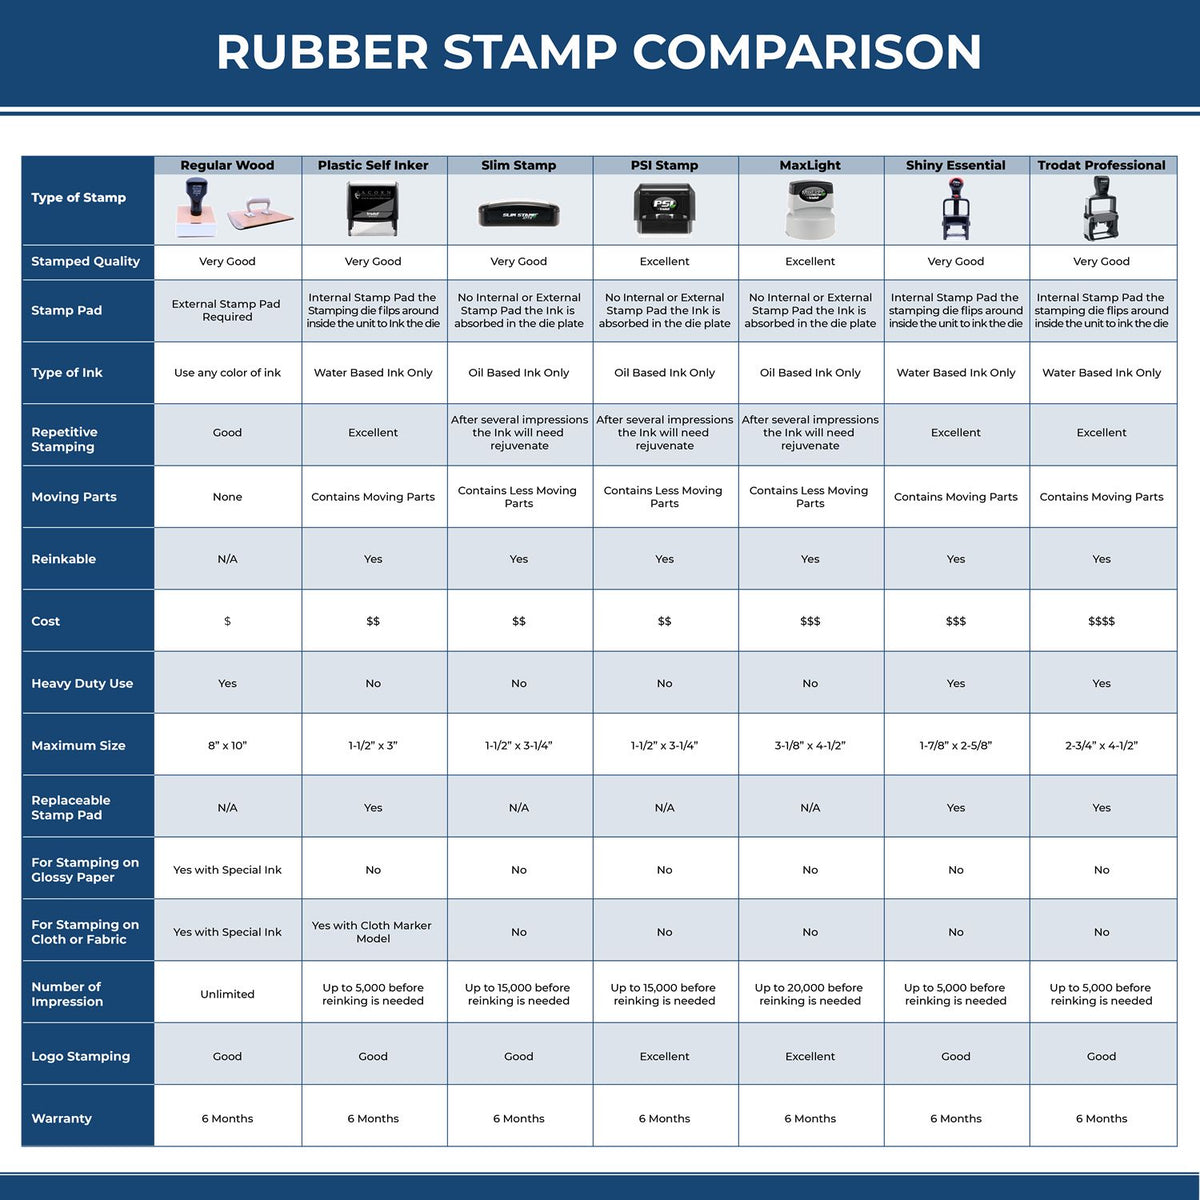 Large Self Inking Summer Term Recommended Stamp 4648S Rubber Stamp Comparison